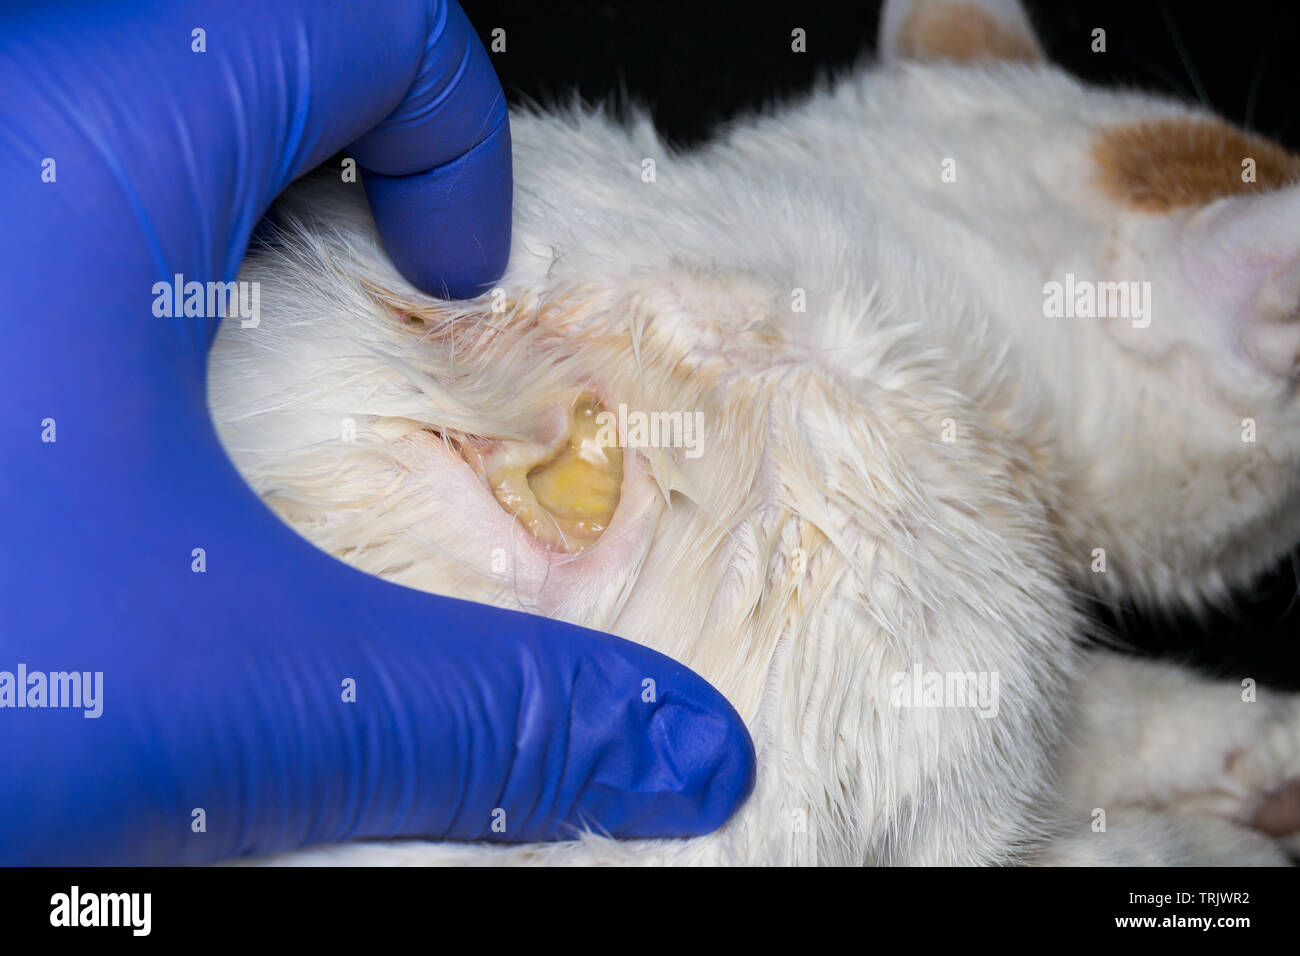 large wound on the skin of a cat after antibiotic treatment subcutaneous injection TRJWR2